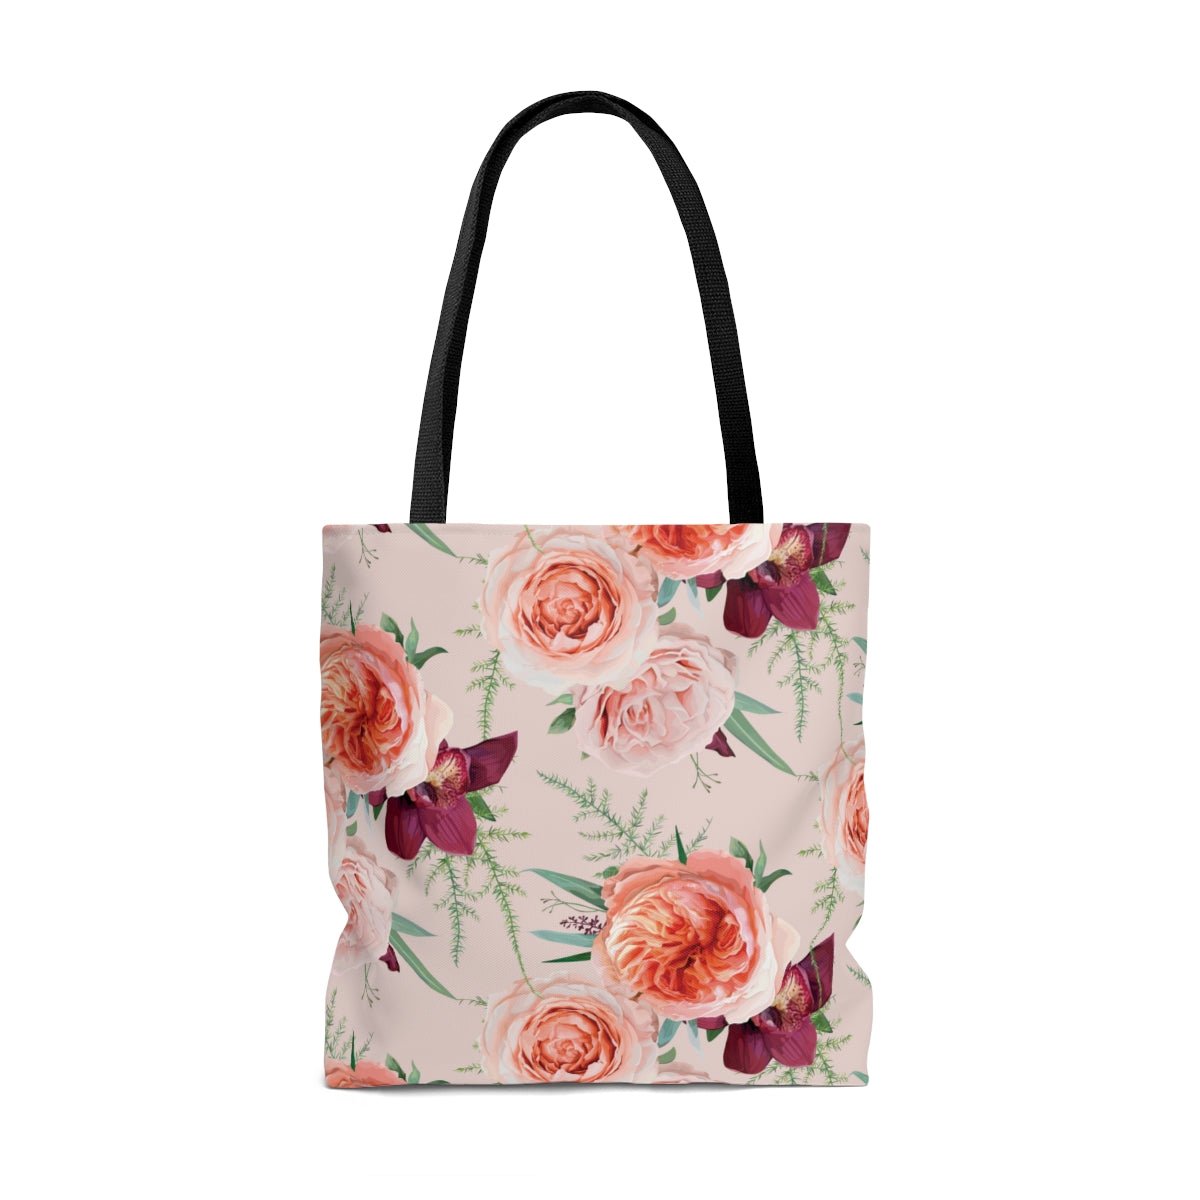 Blush Roses Tote Bag - Puffin Lime